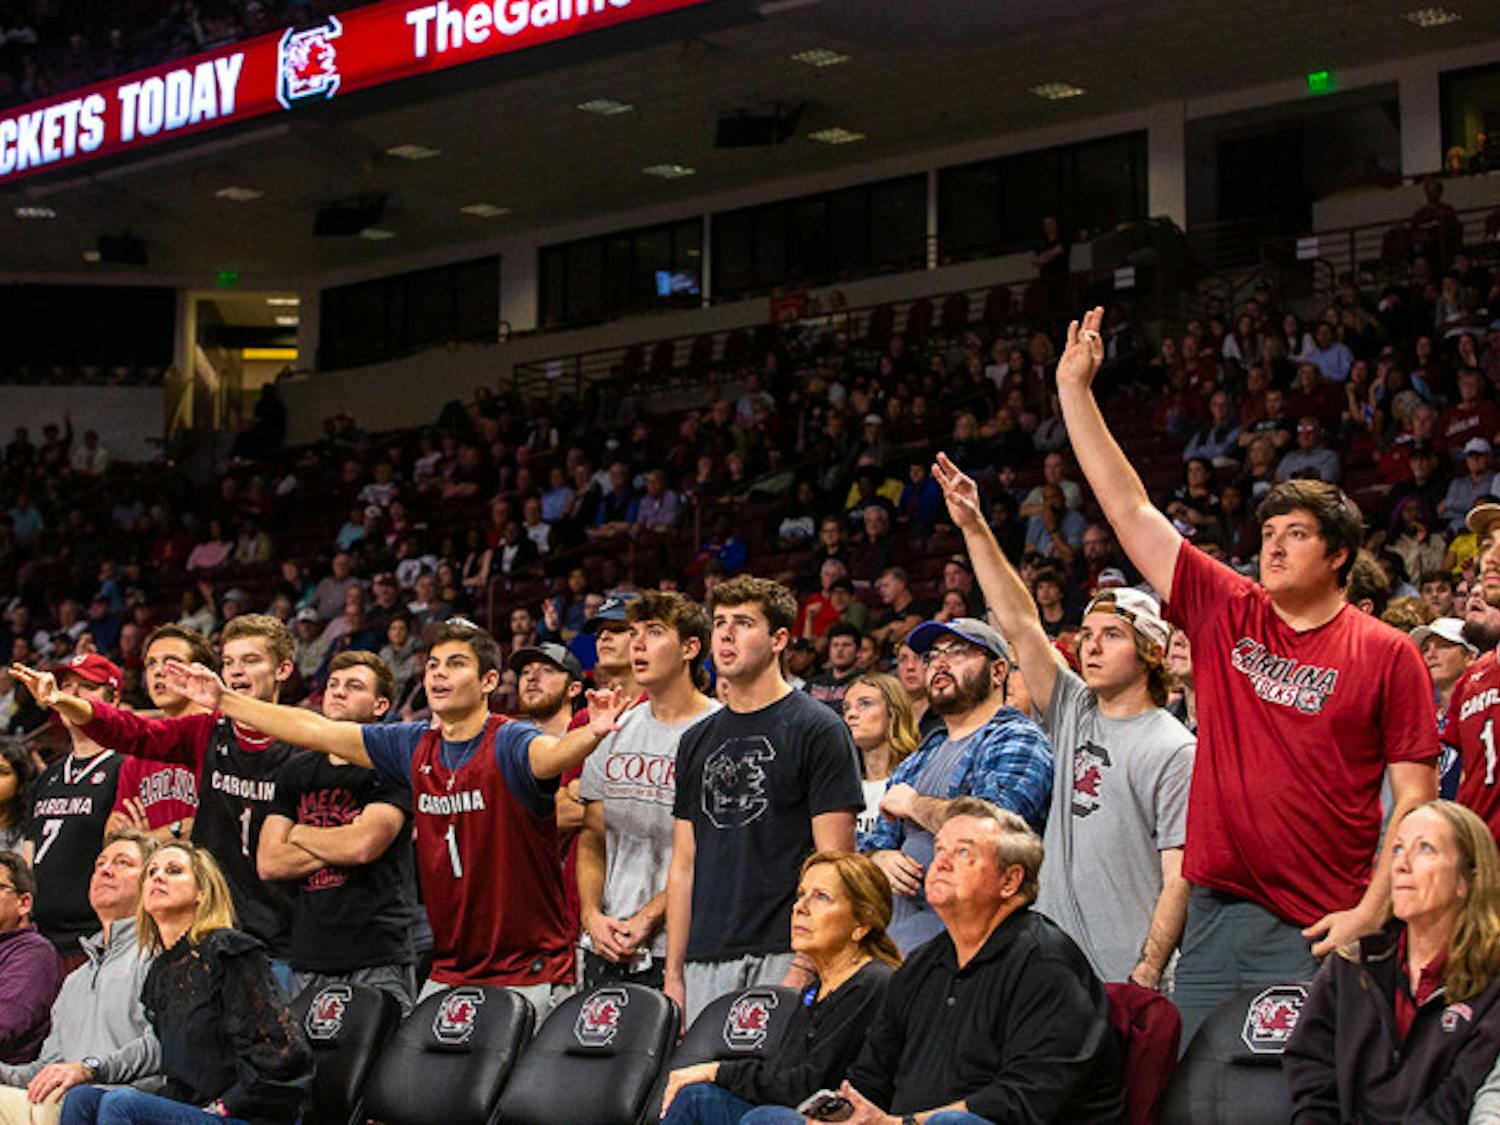 The South Carolina student section and fellow fans are caught in awe as a ball flies through the air towards the basket. The Gamecock’s season opener resulted in them defeating S.C. State 80-77 on Nov. 8, 2022.